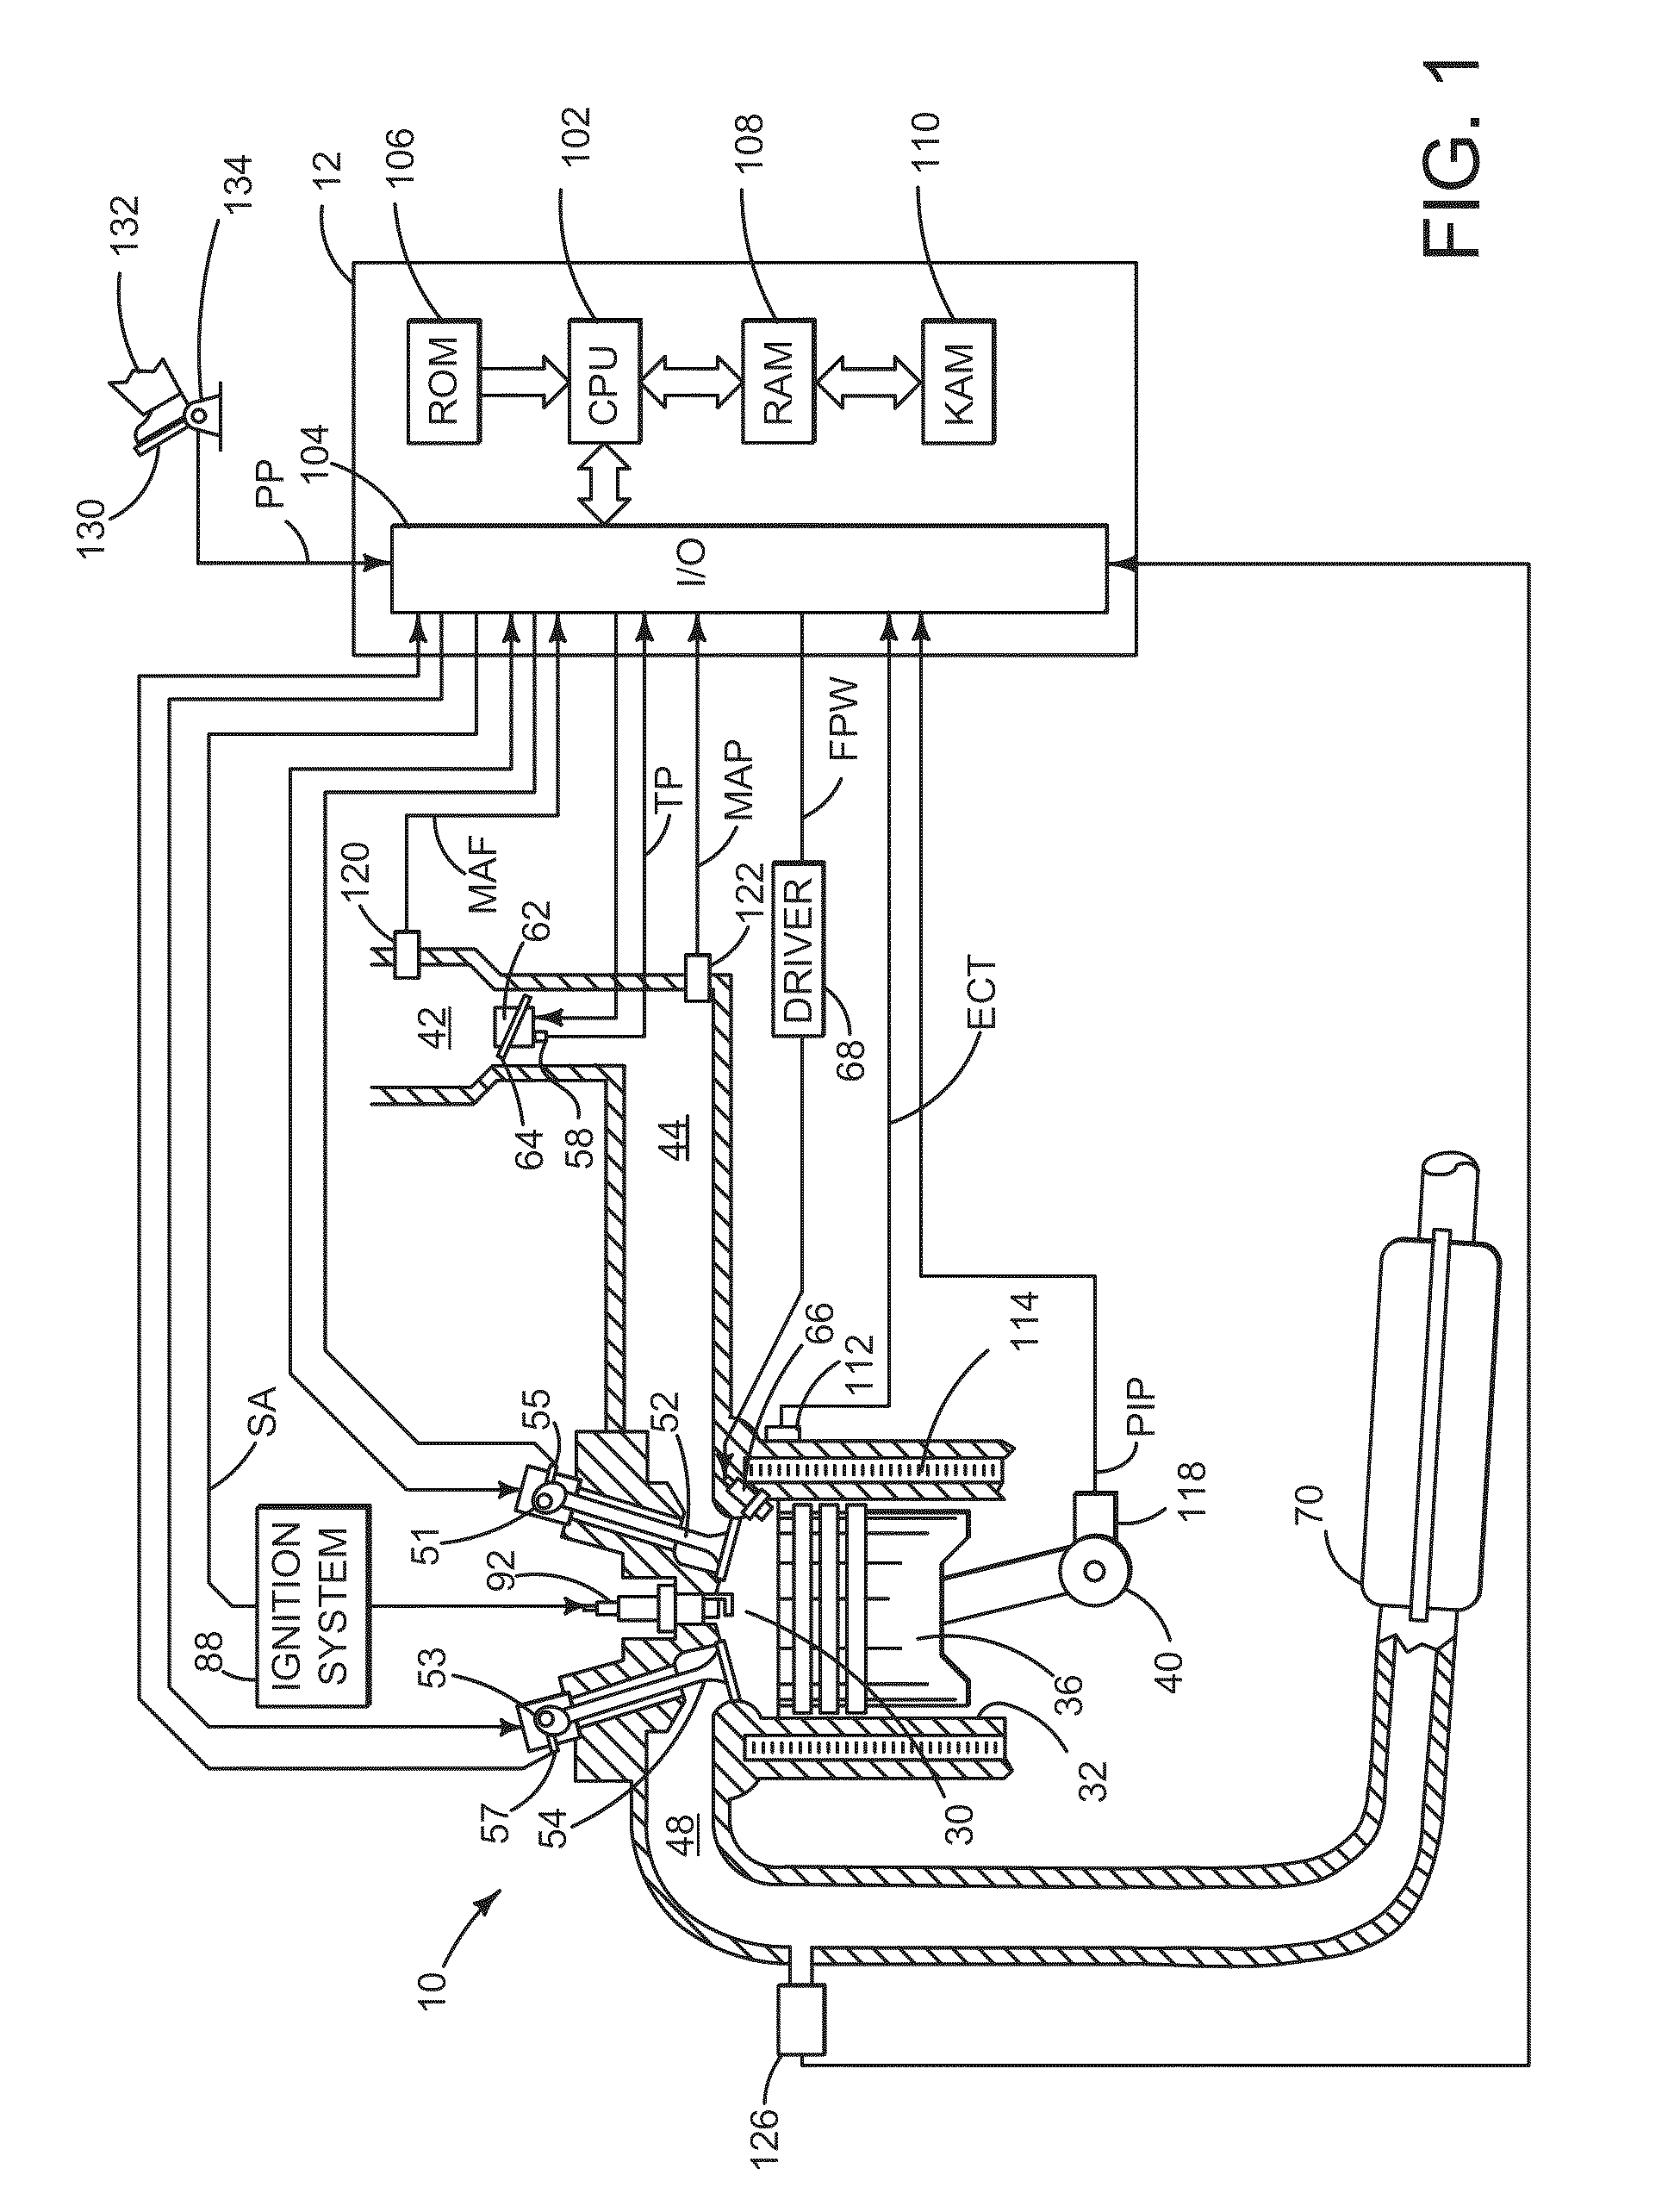 Method and system for improving automatic engine stopping